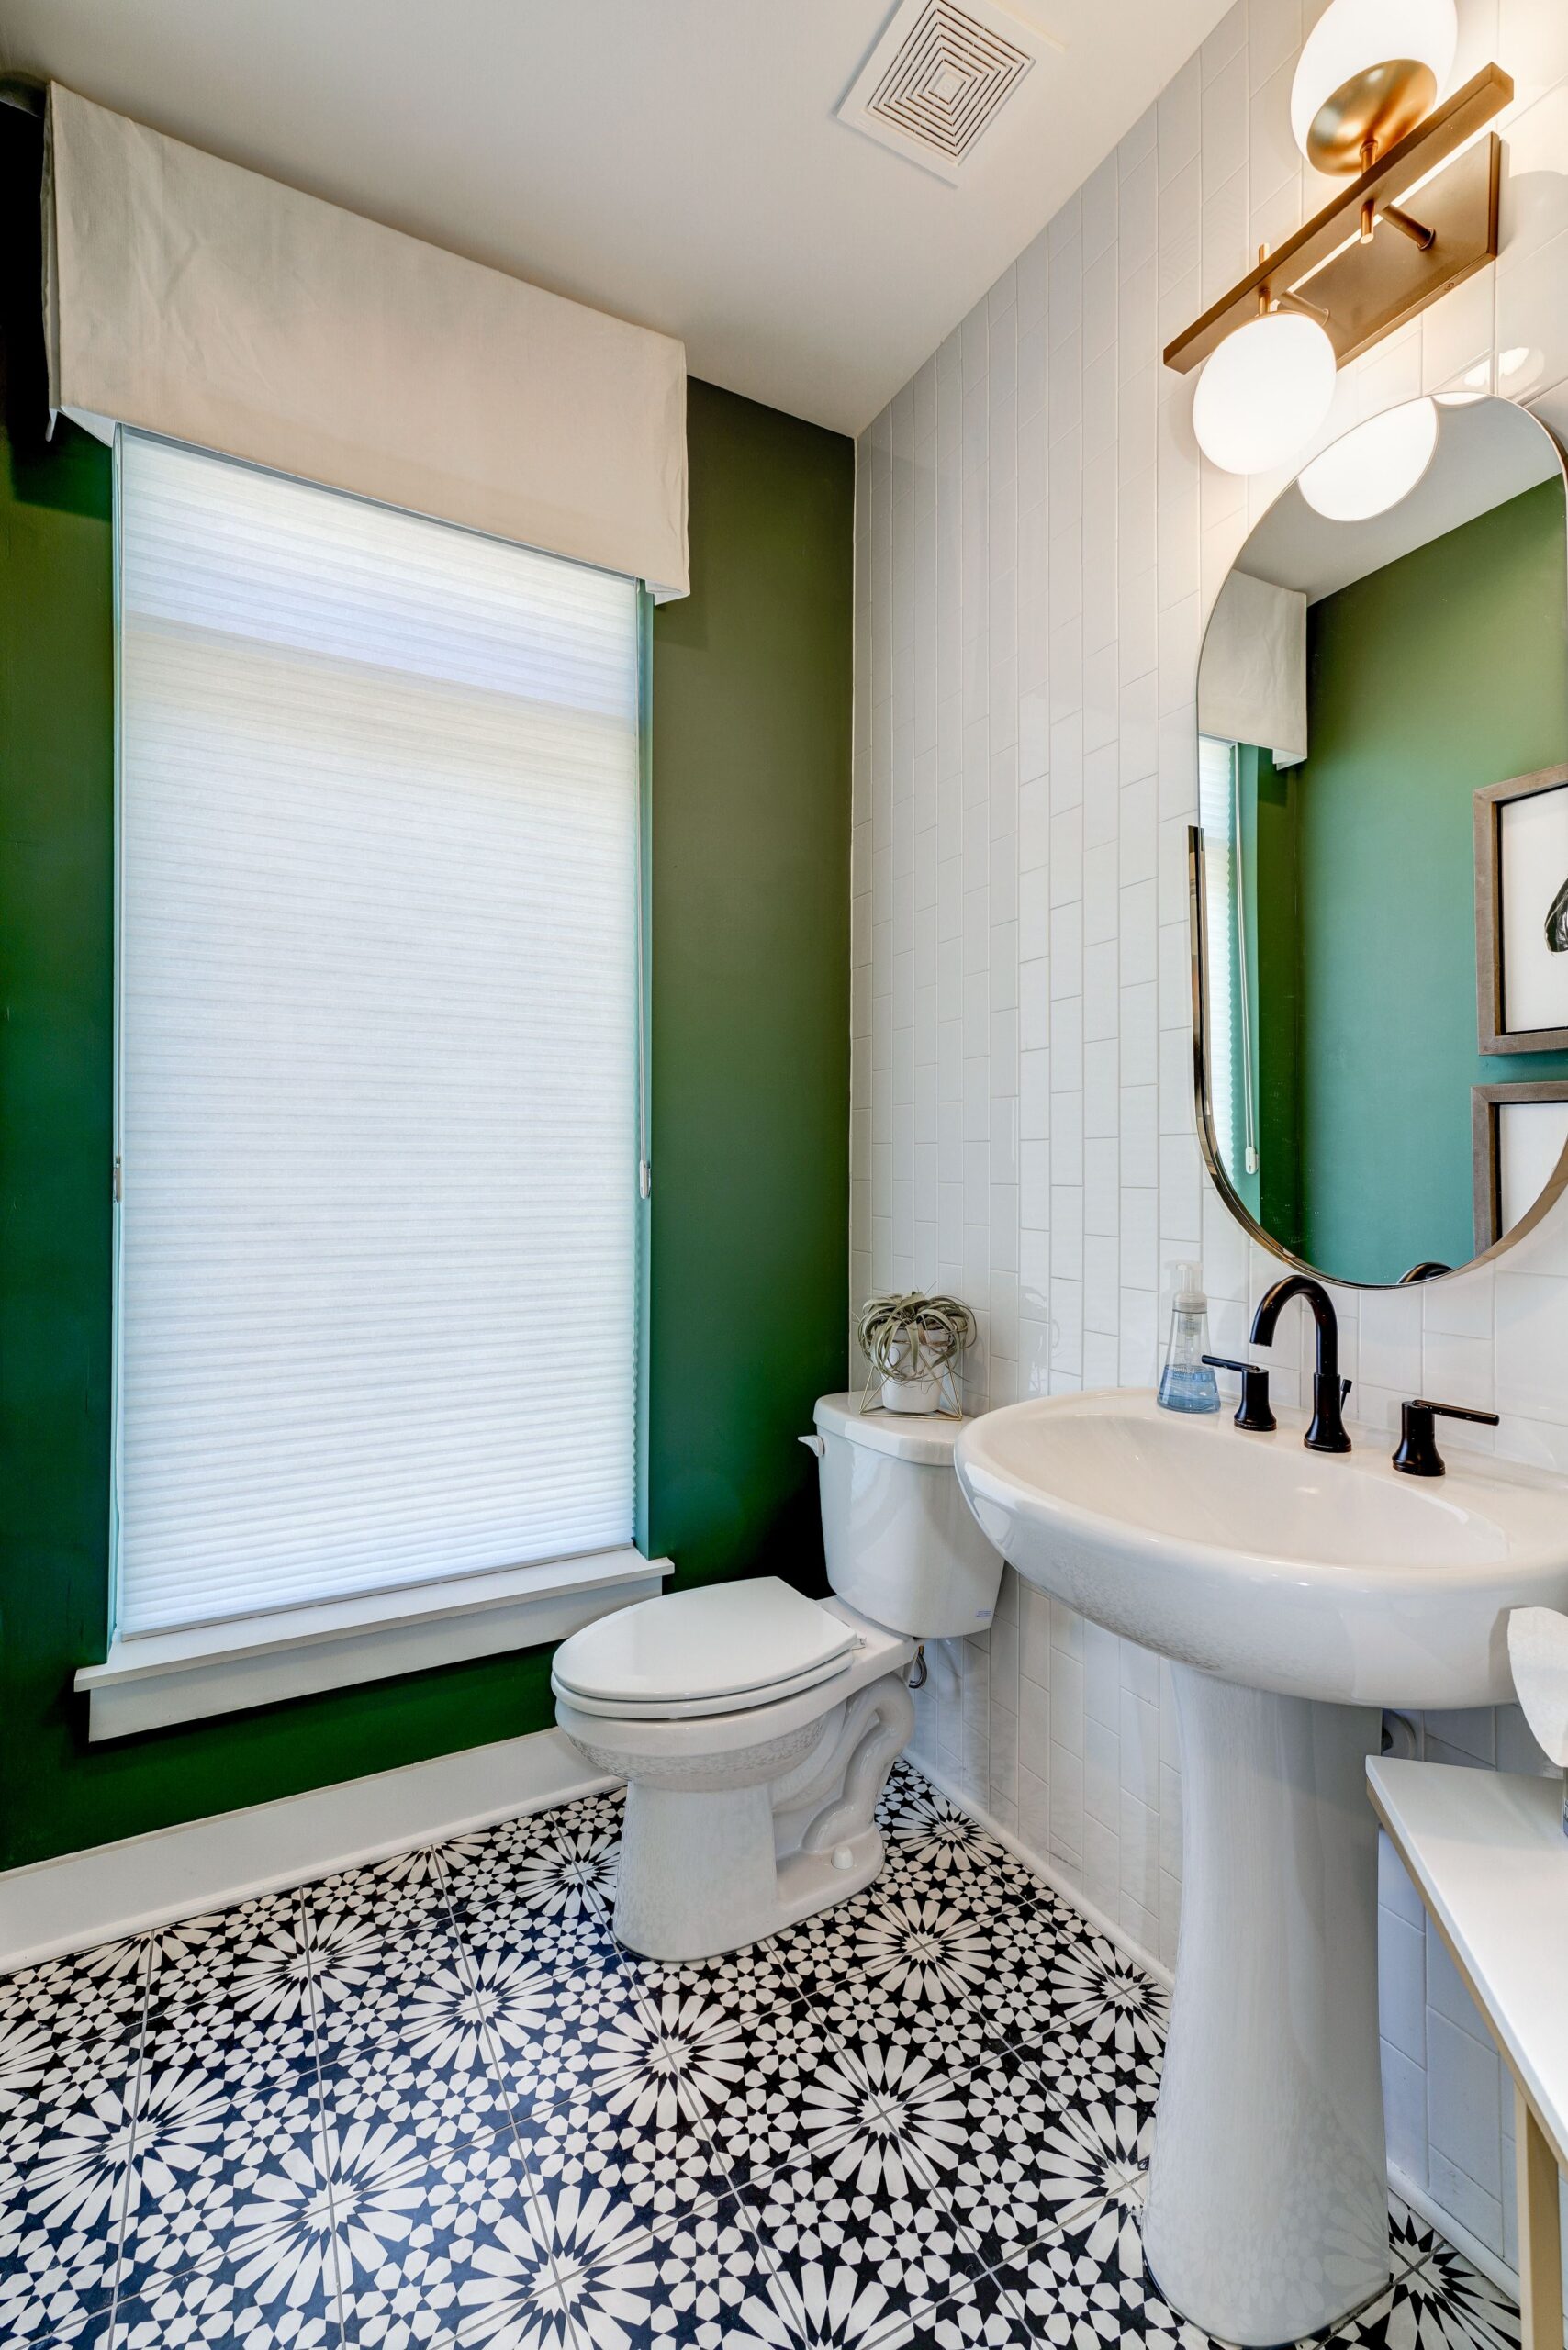 5 Incredible Features Every Powder Room Needs